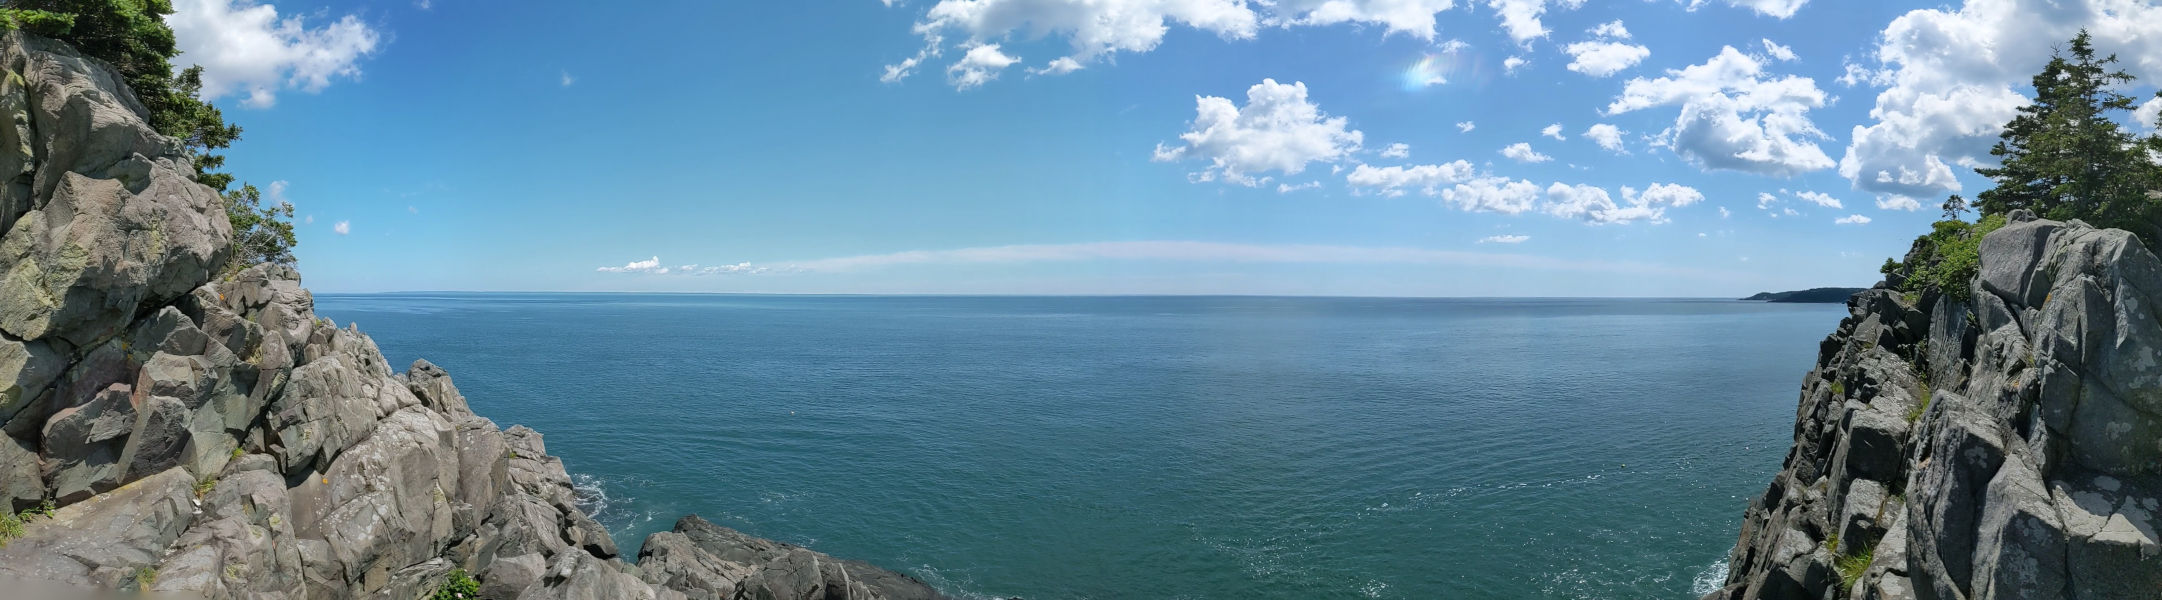 First panorama of some cliffs